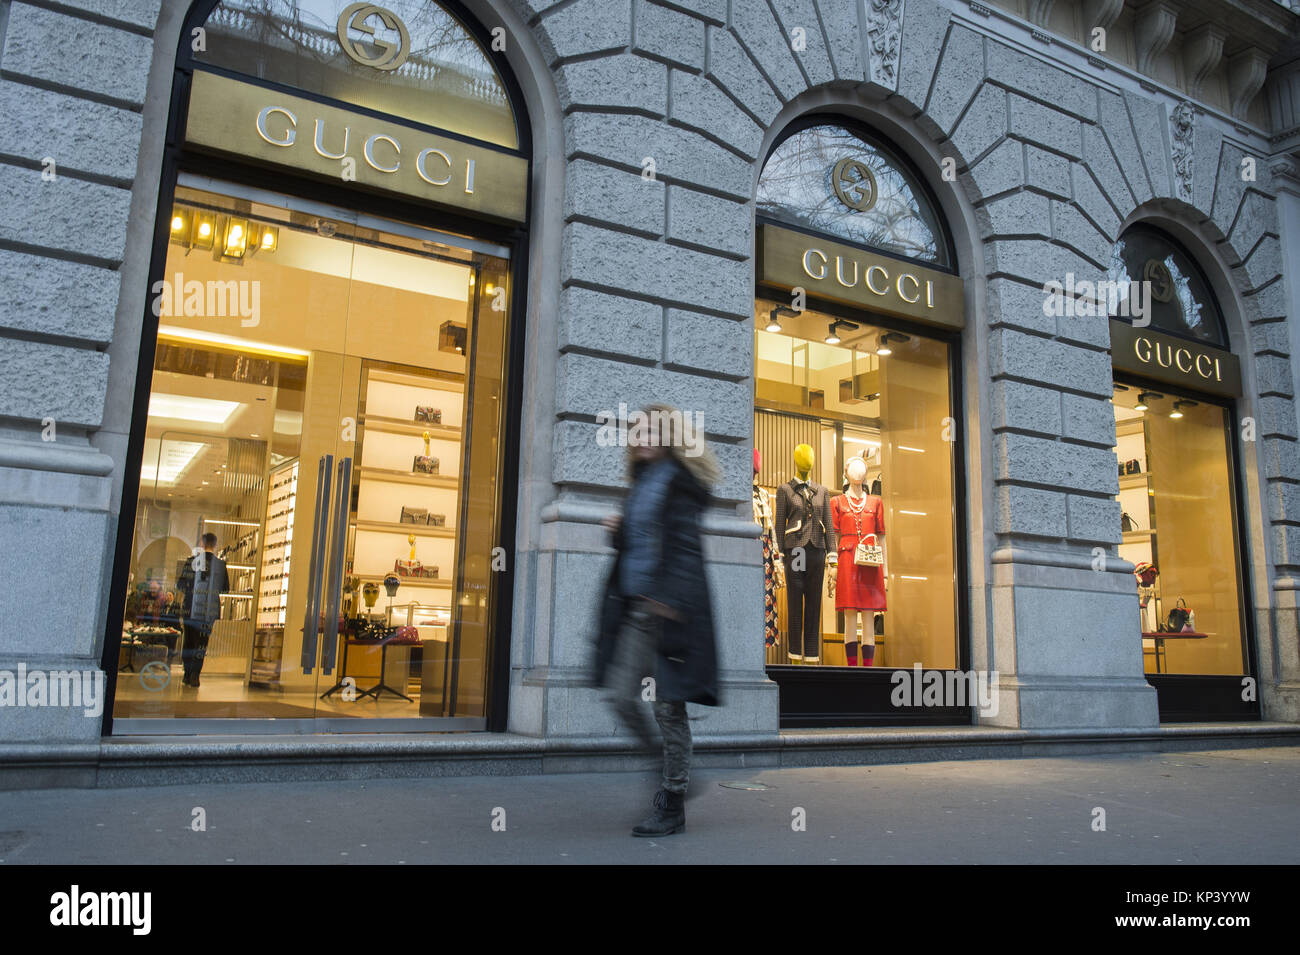 Budapest, Hungary. 12th Dec, 2017. A woman passes by Gucci store during  Christmas time. Credit: Omar Marques/SOPA/ZUMA Wire/Alamy Live News Stock  Photo - Alamy